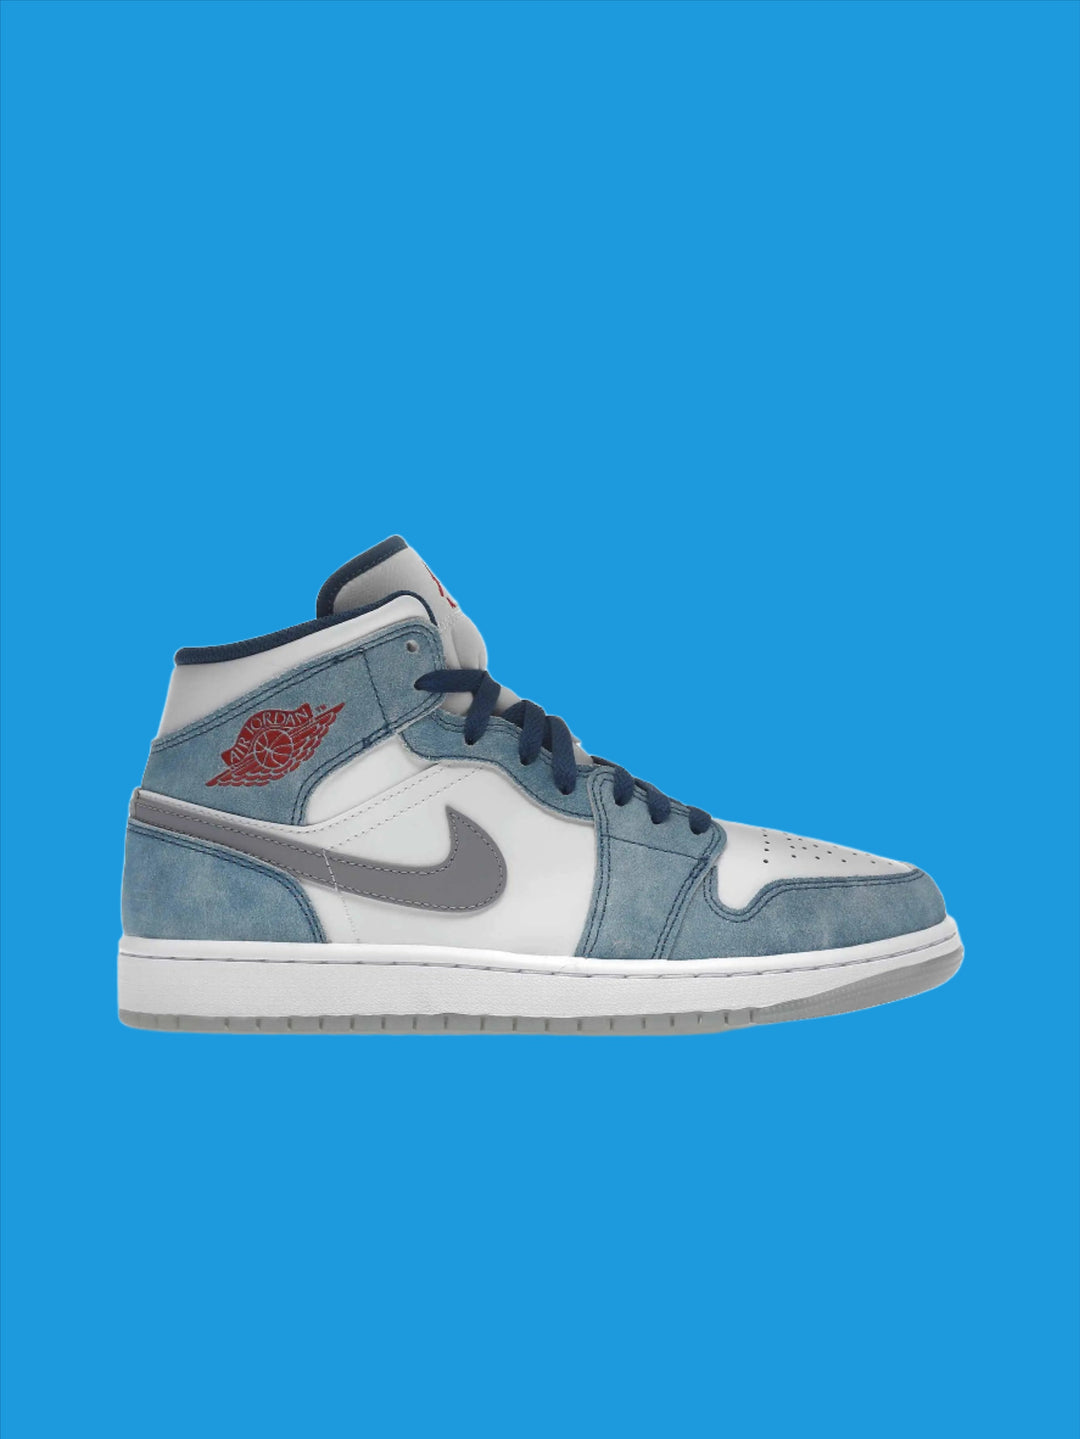 Nike Air Jordan 1 Mid French Blue Fire Red Prior